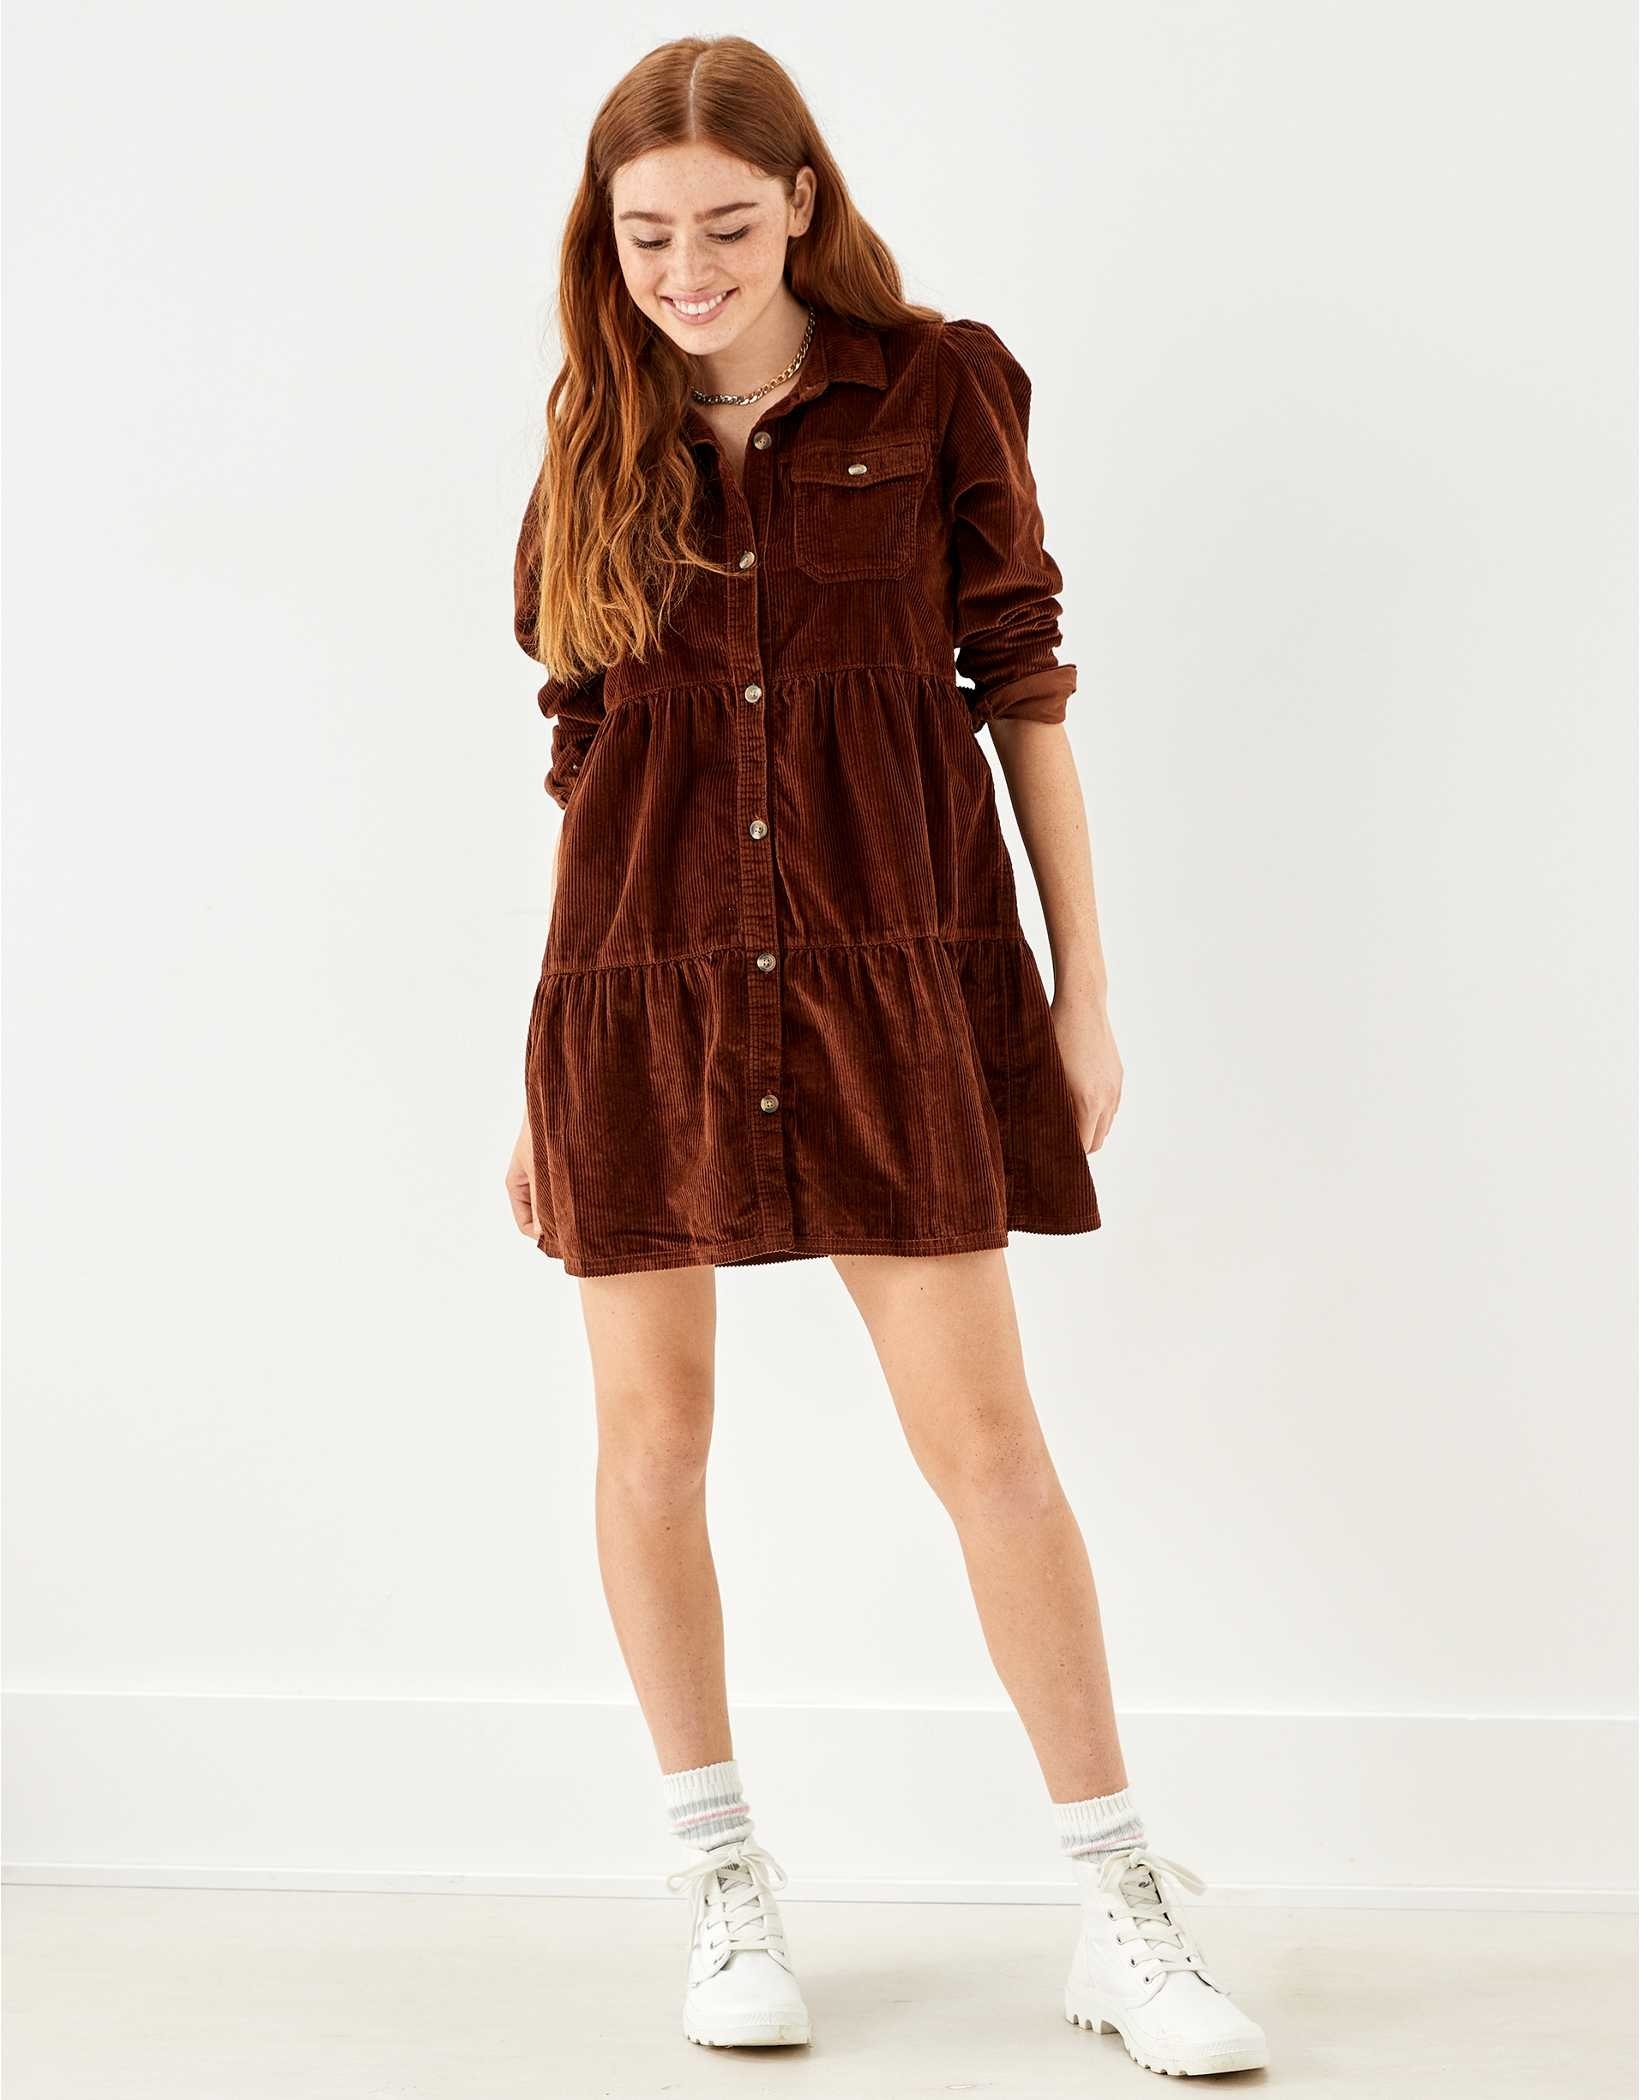 Model wearing the rust dress with crew socks and sneakers